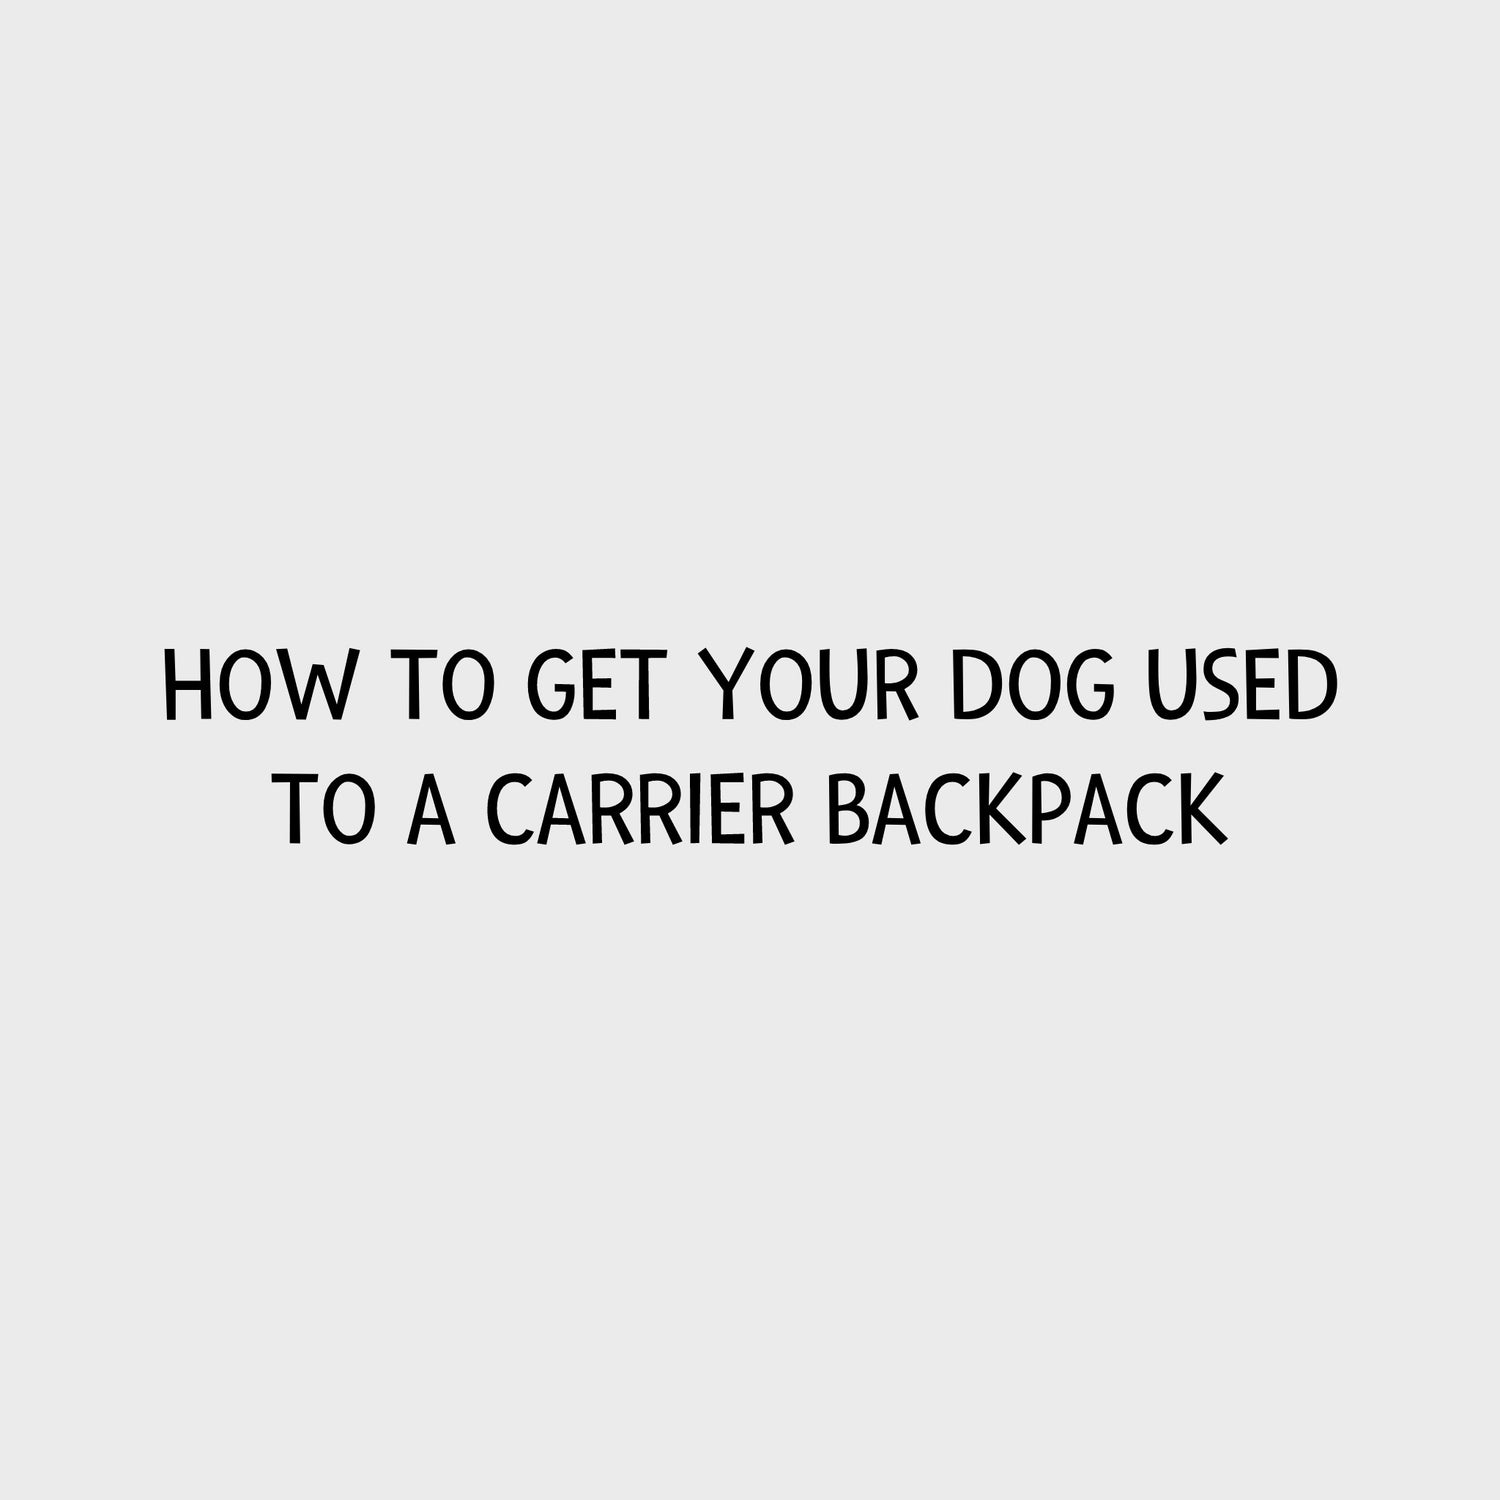 Video - How to get your dog used to a carrier backpack